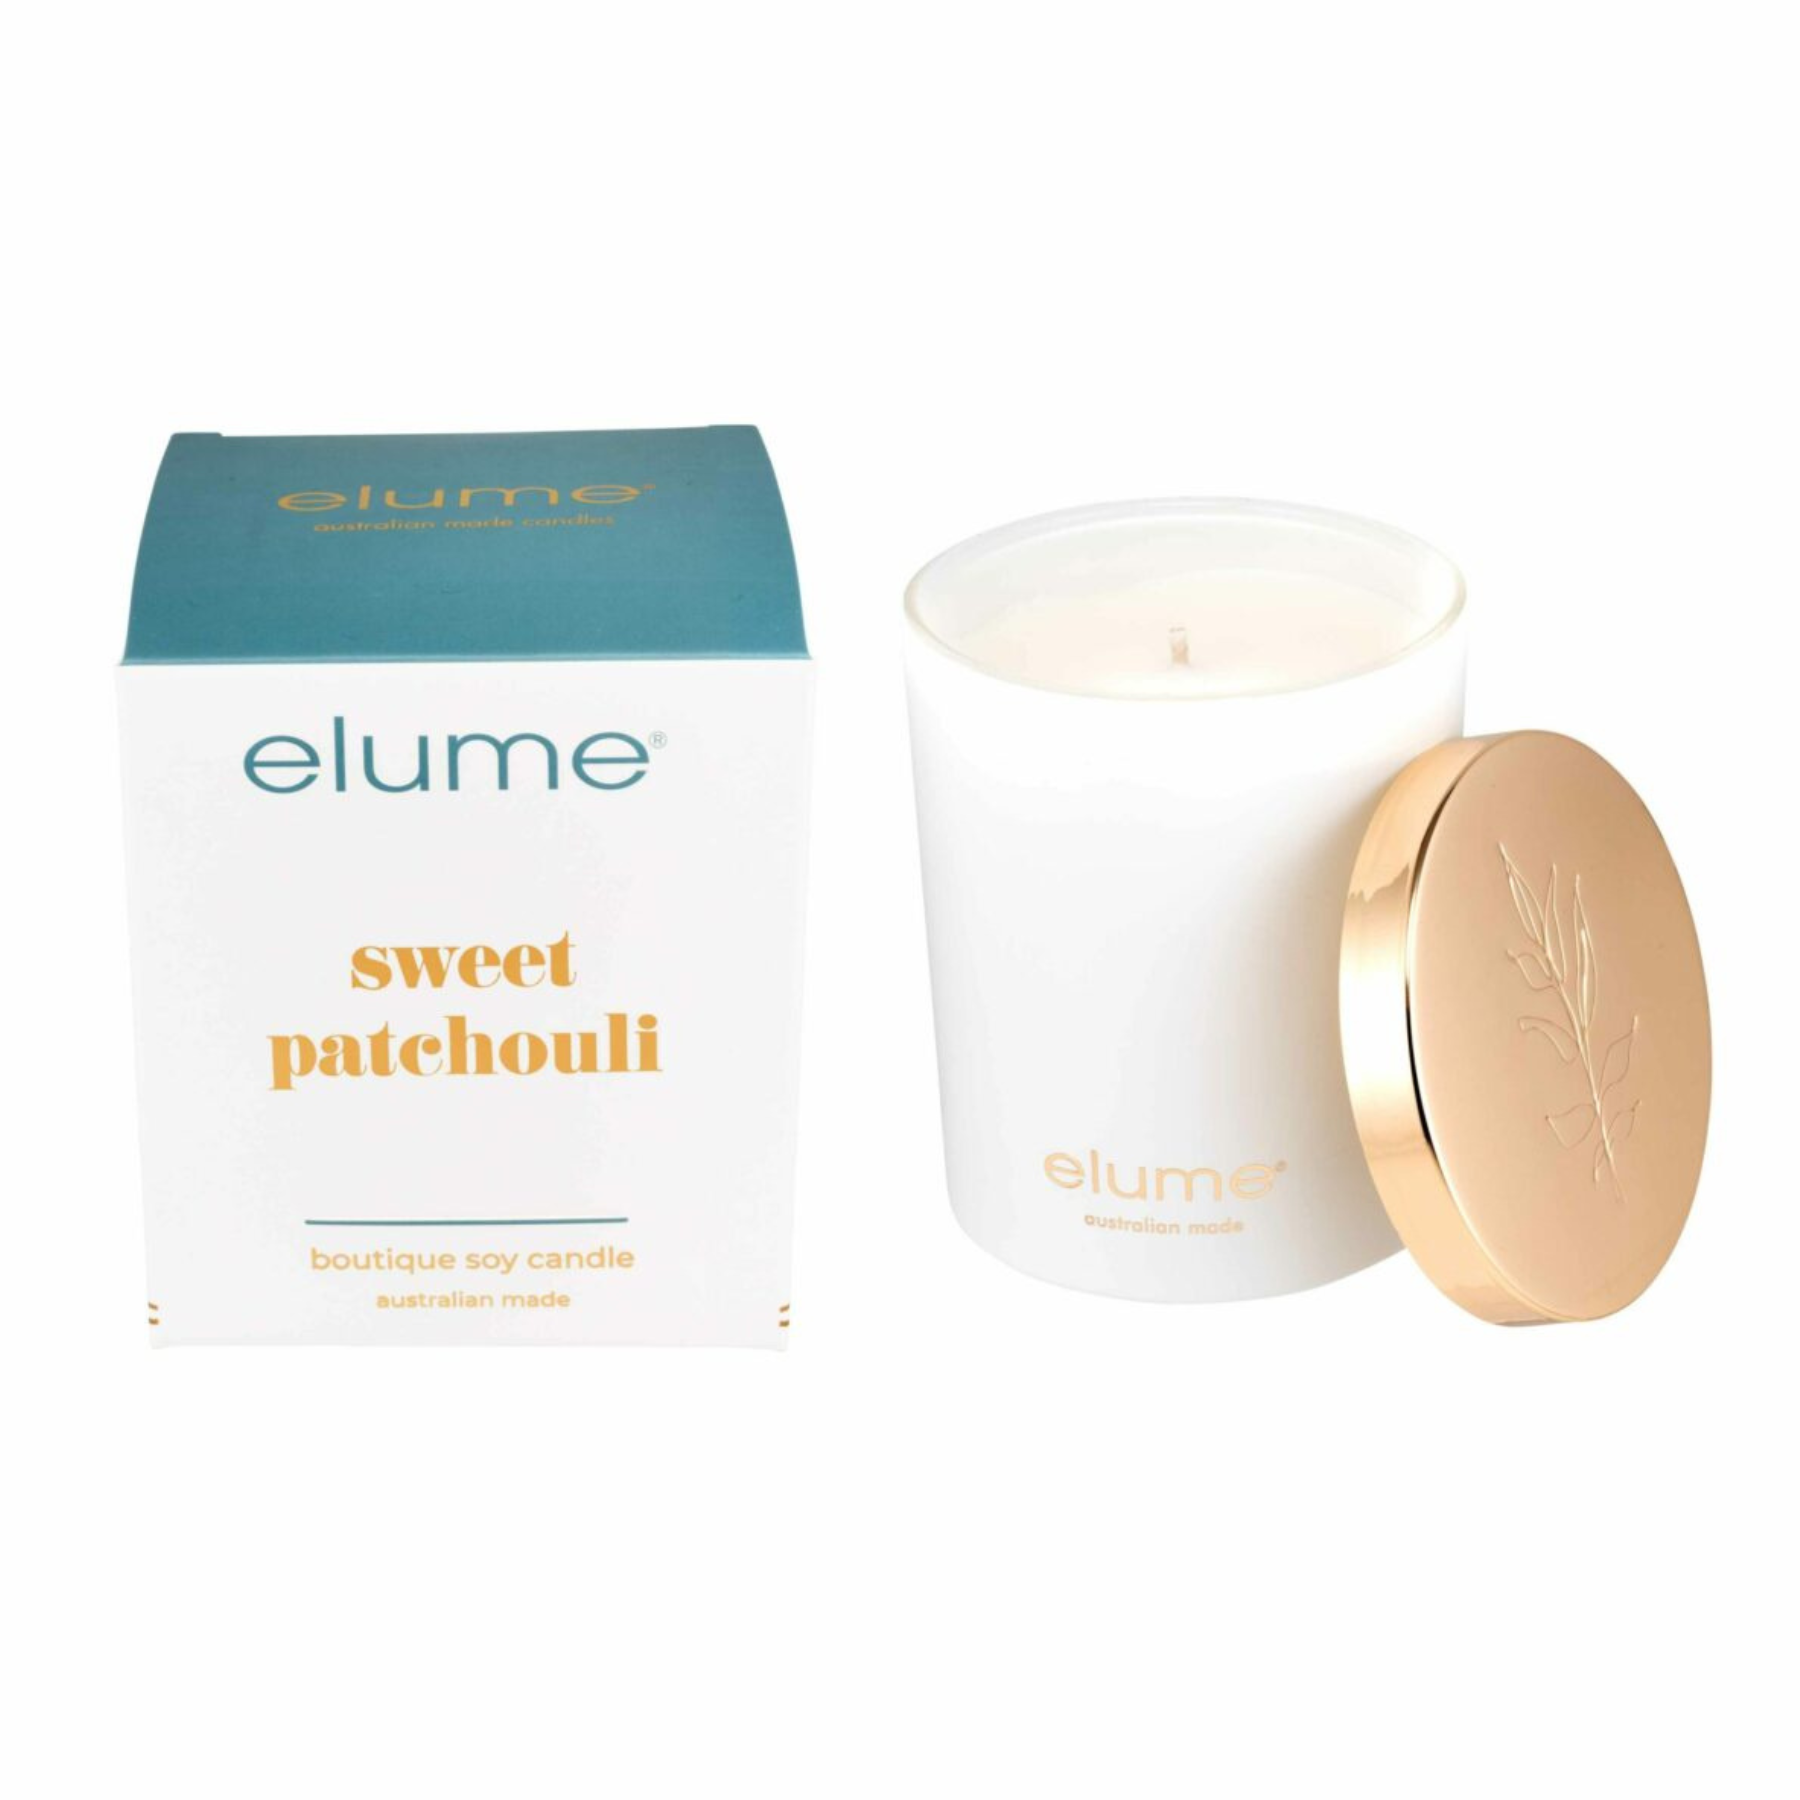 Sweet Patchouli: Elume Boutique Soy Candle